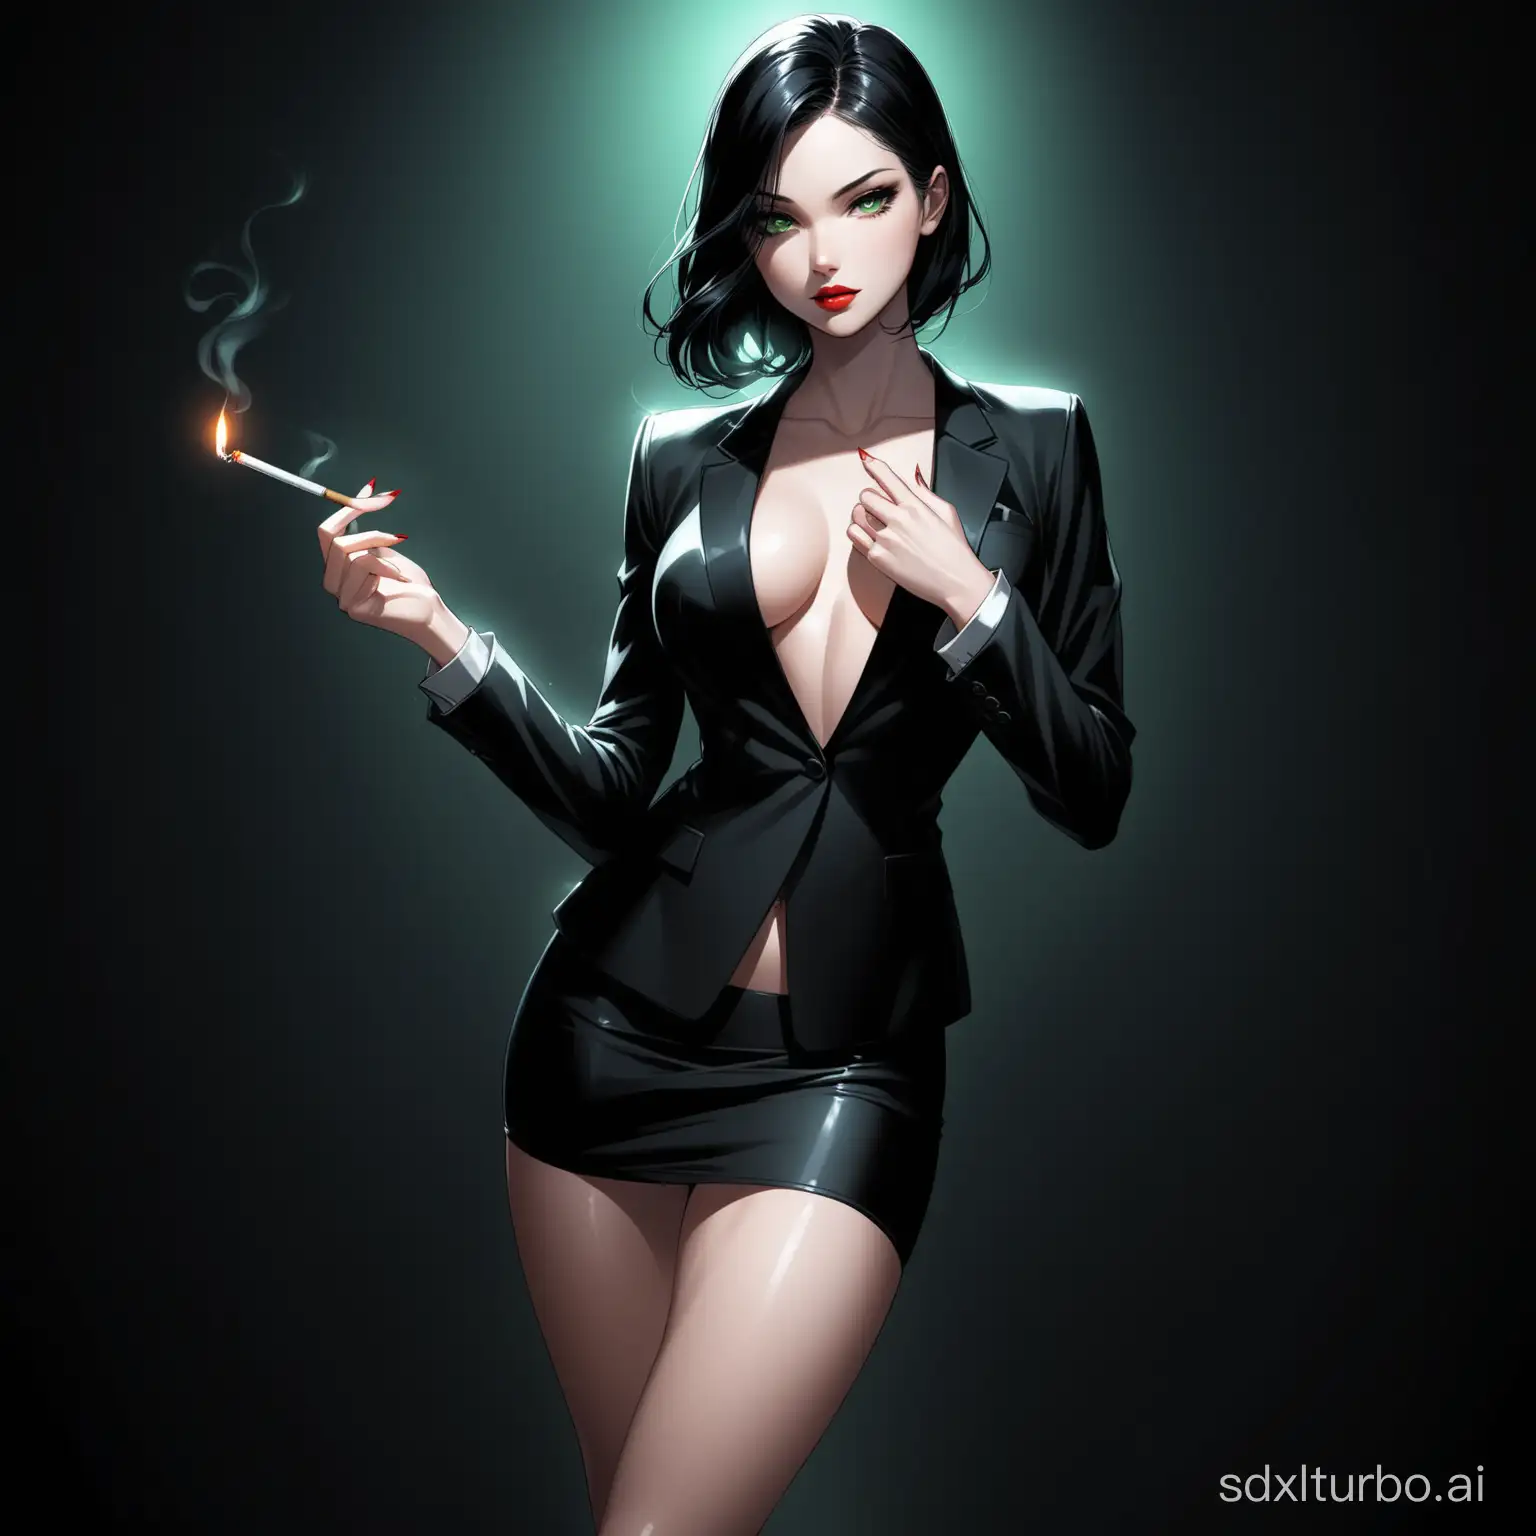 Seductive-Woman-in-Black-Suit-Holding-Cigarette-and-Mysterious-Object-in-Dark-Room